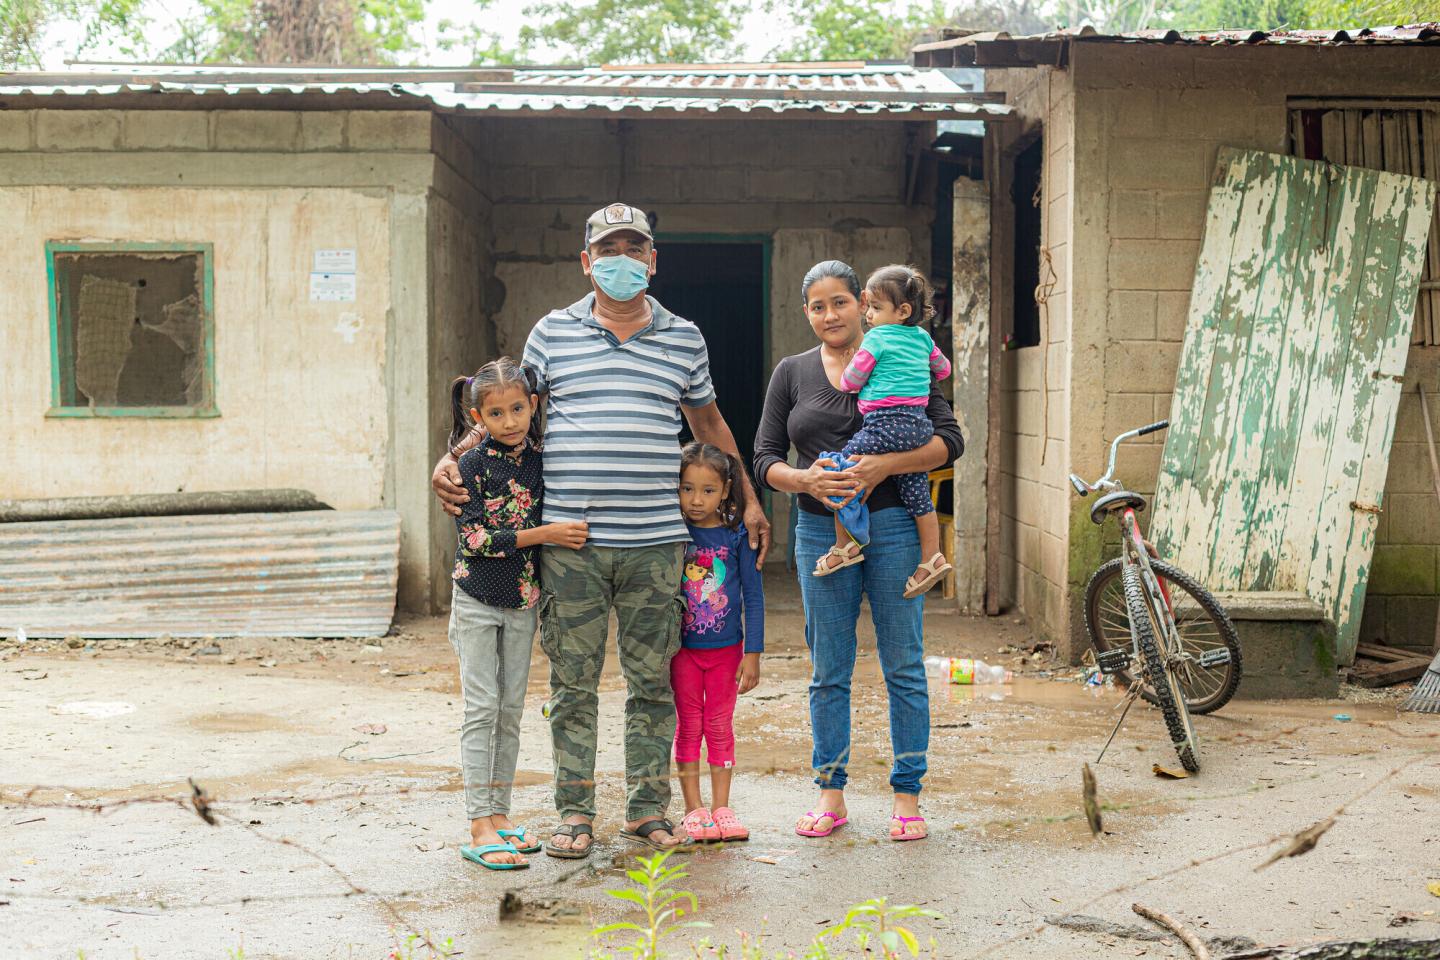 A Honduran family of five stands in front of their home.